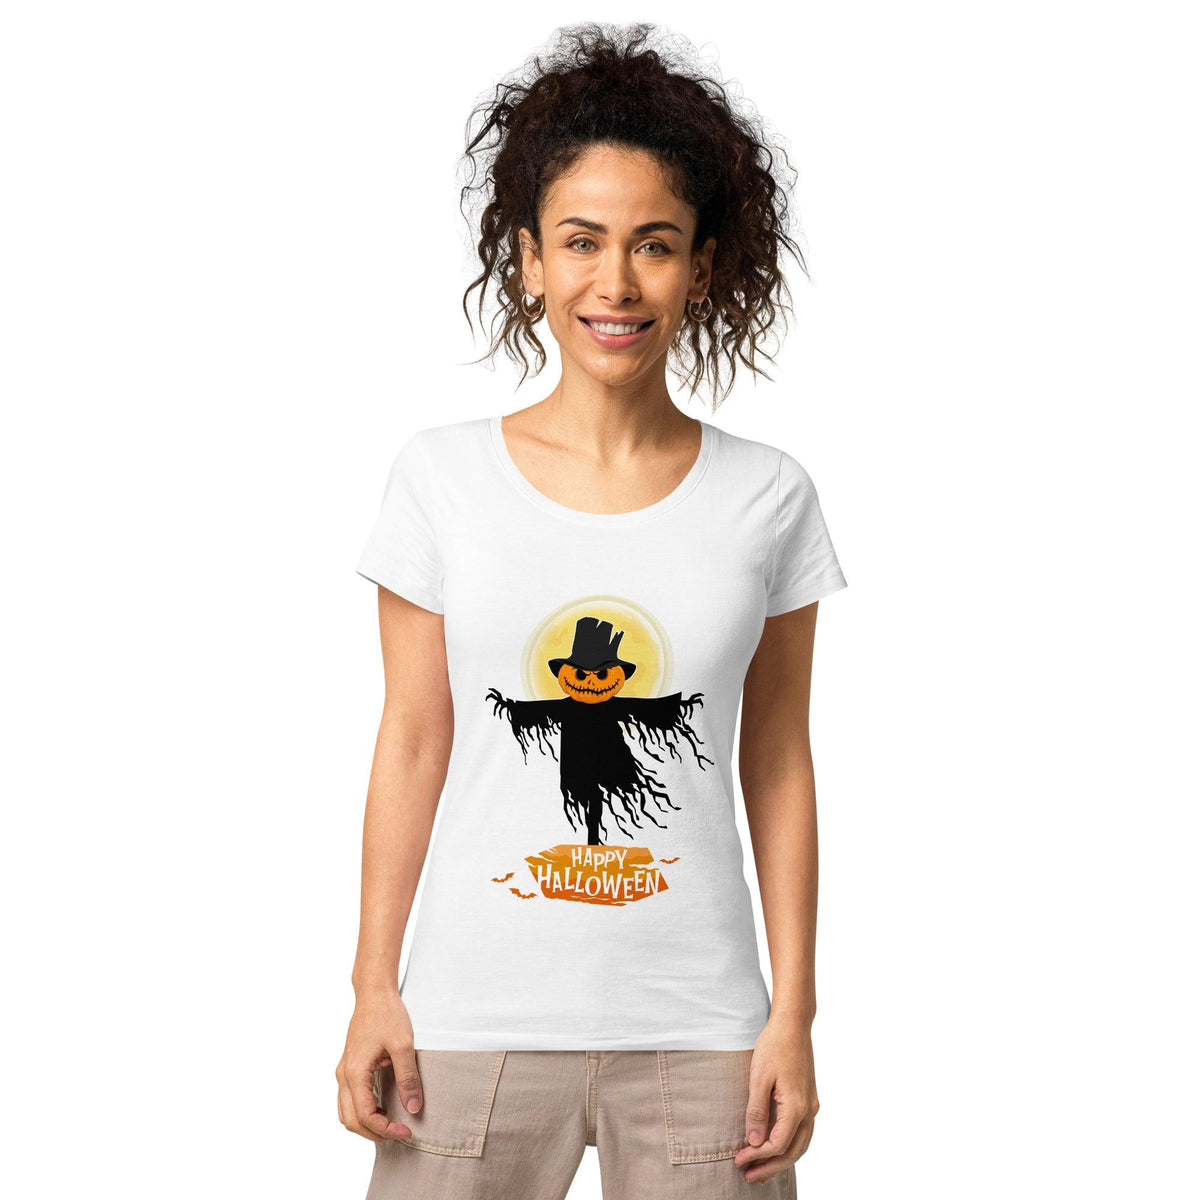 Woman wearing organic Halloween tee with haunted house design, ready for spooky festivities.